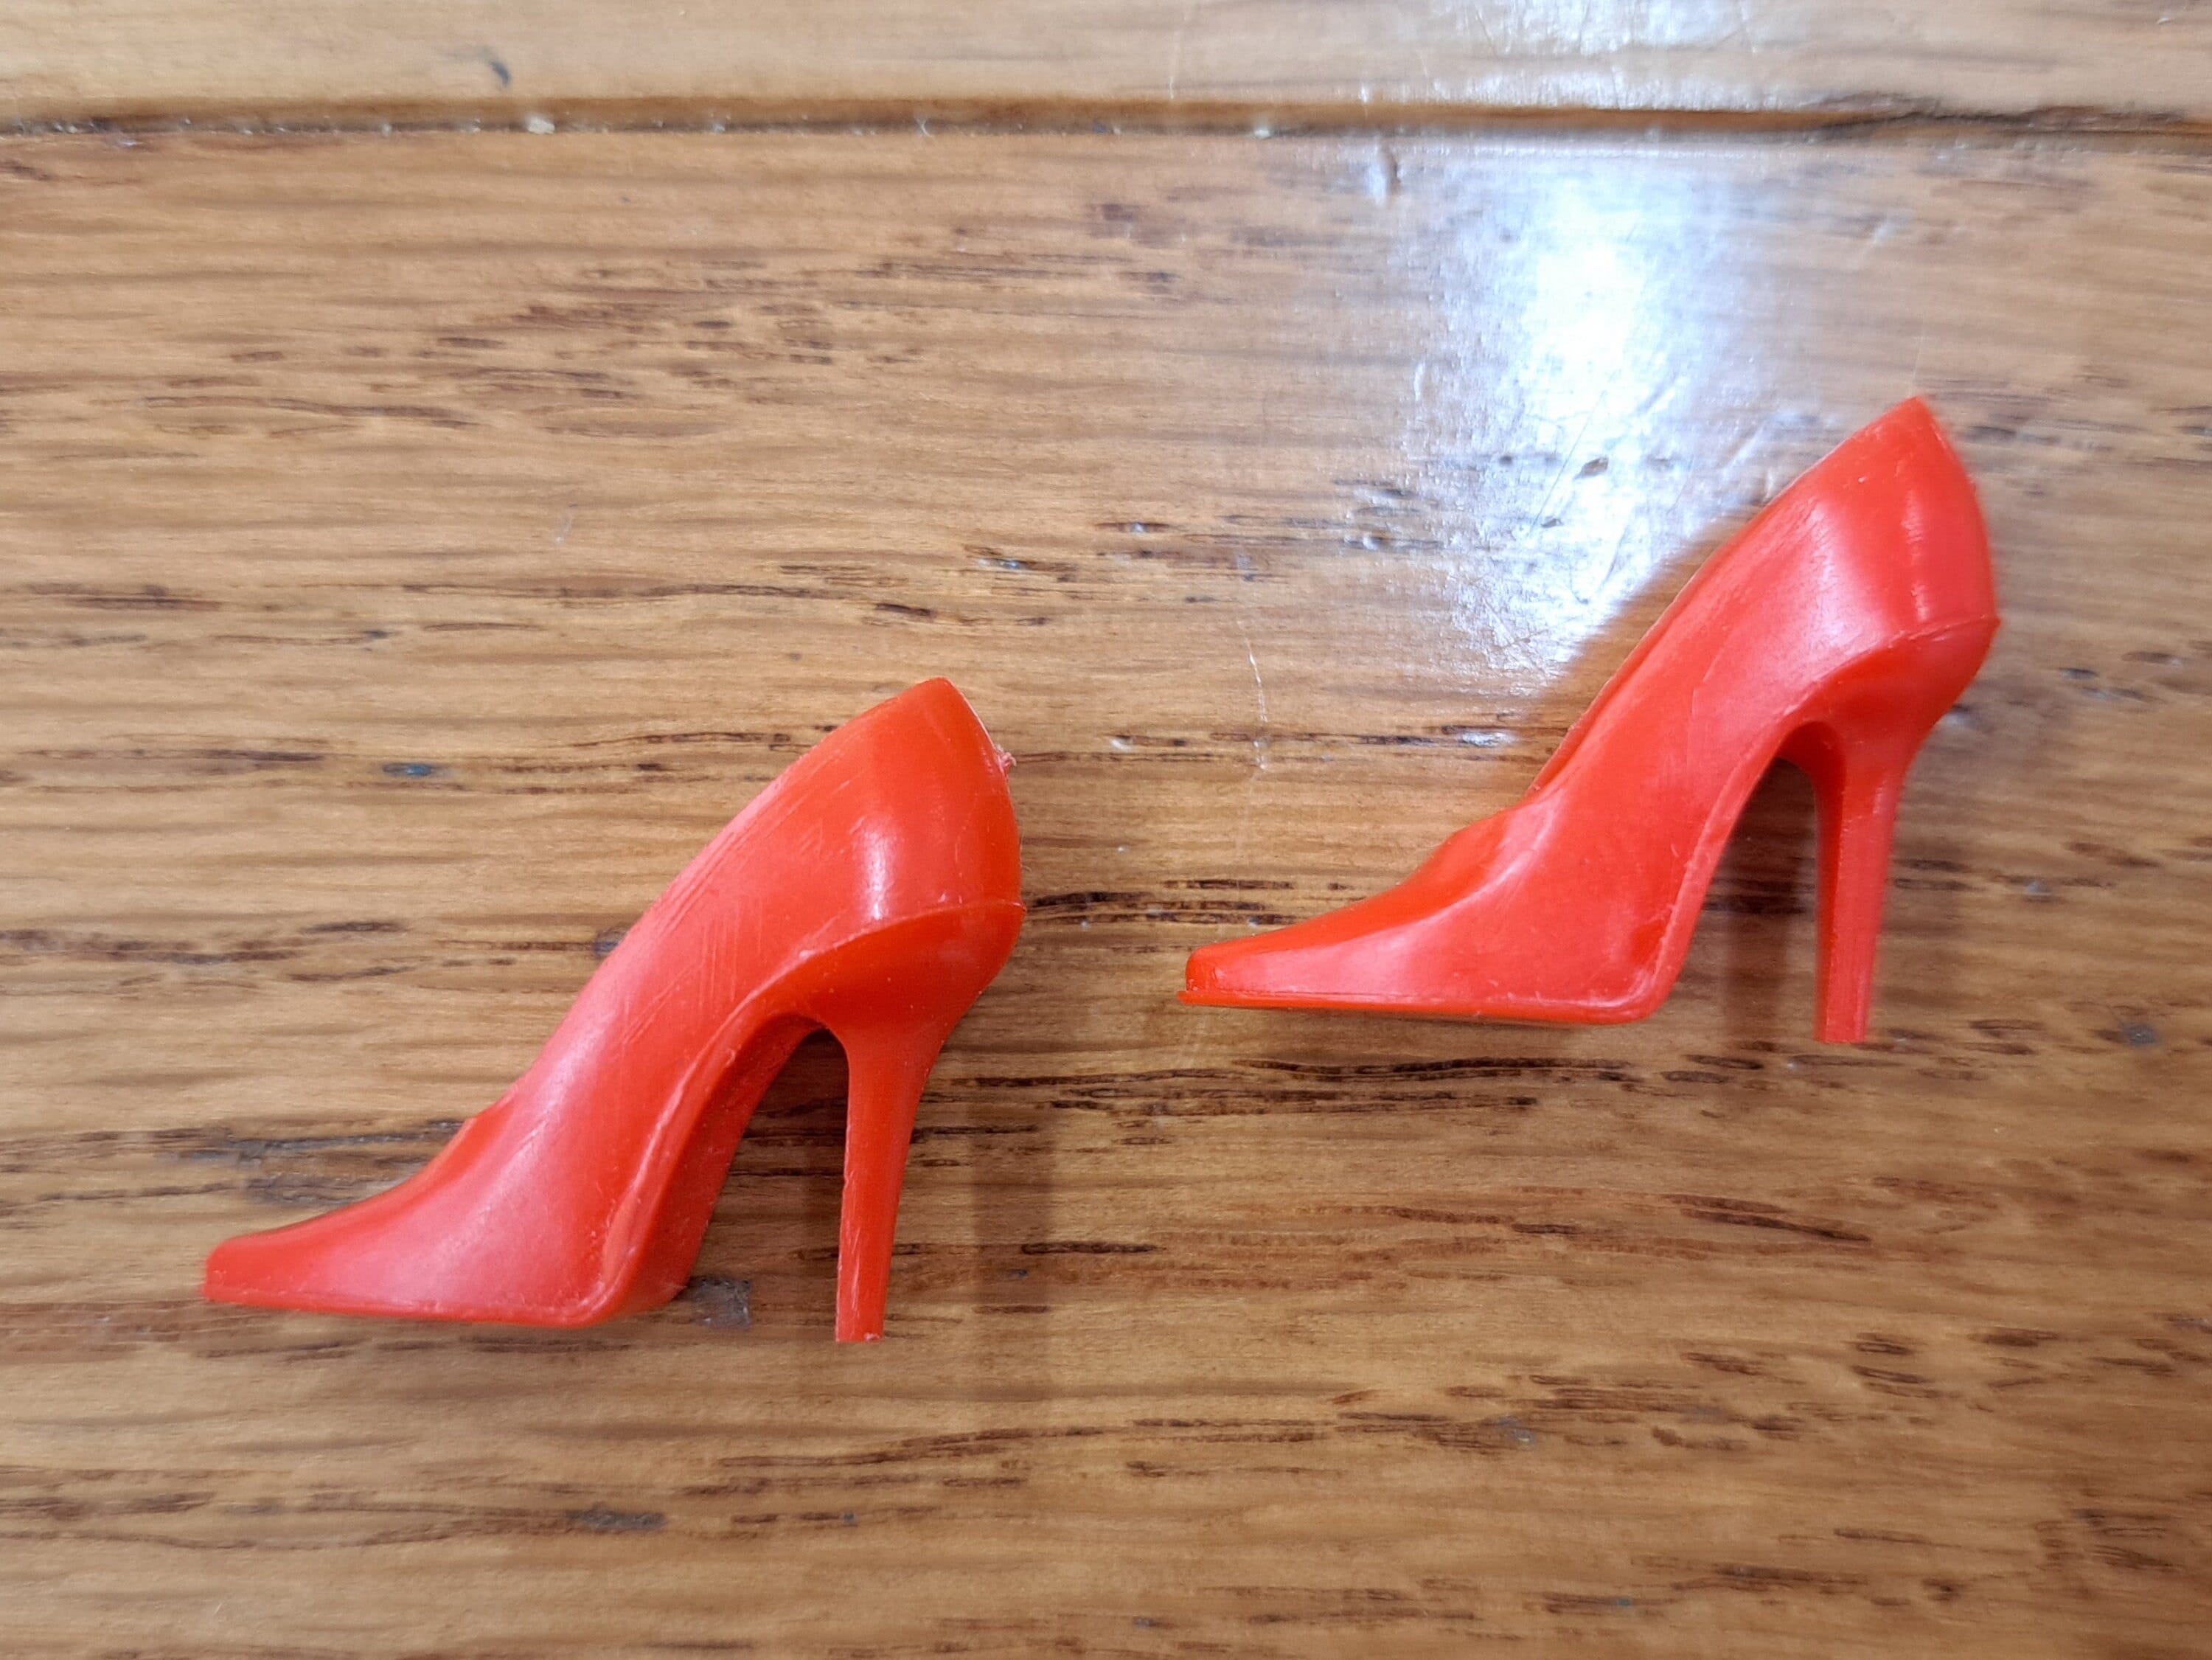 Buy Handmade Barbie Heels, made to order from Unique'z